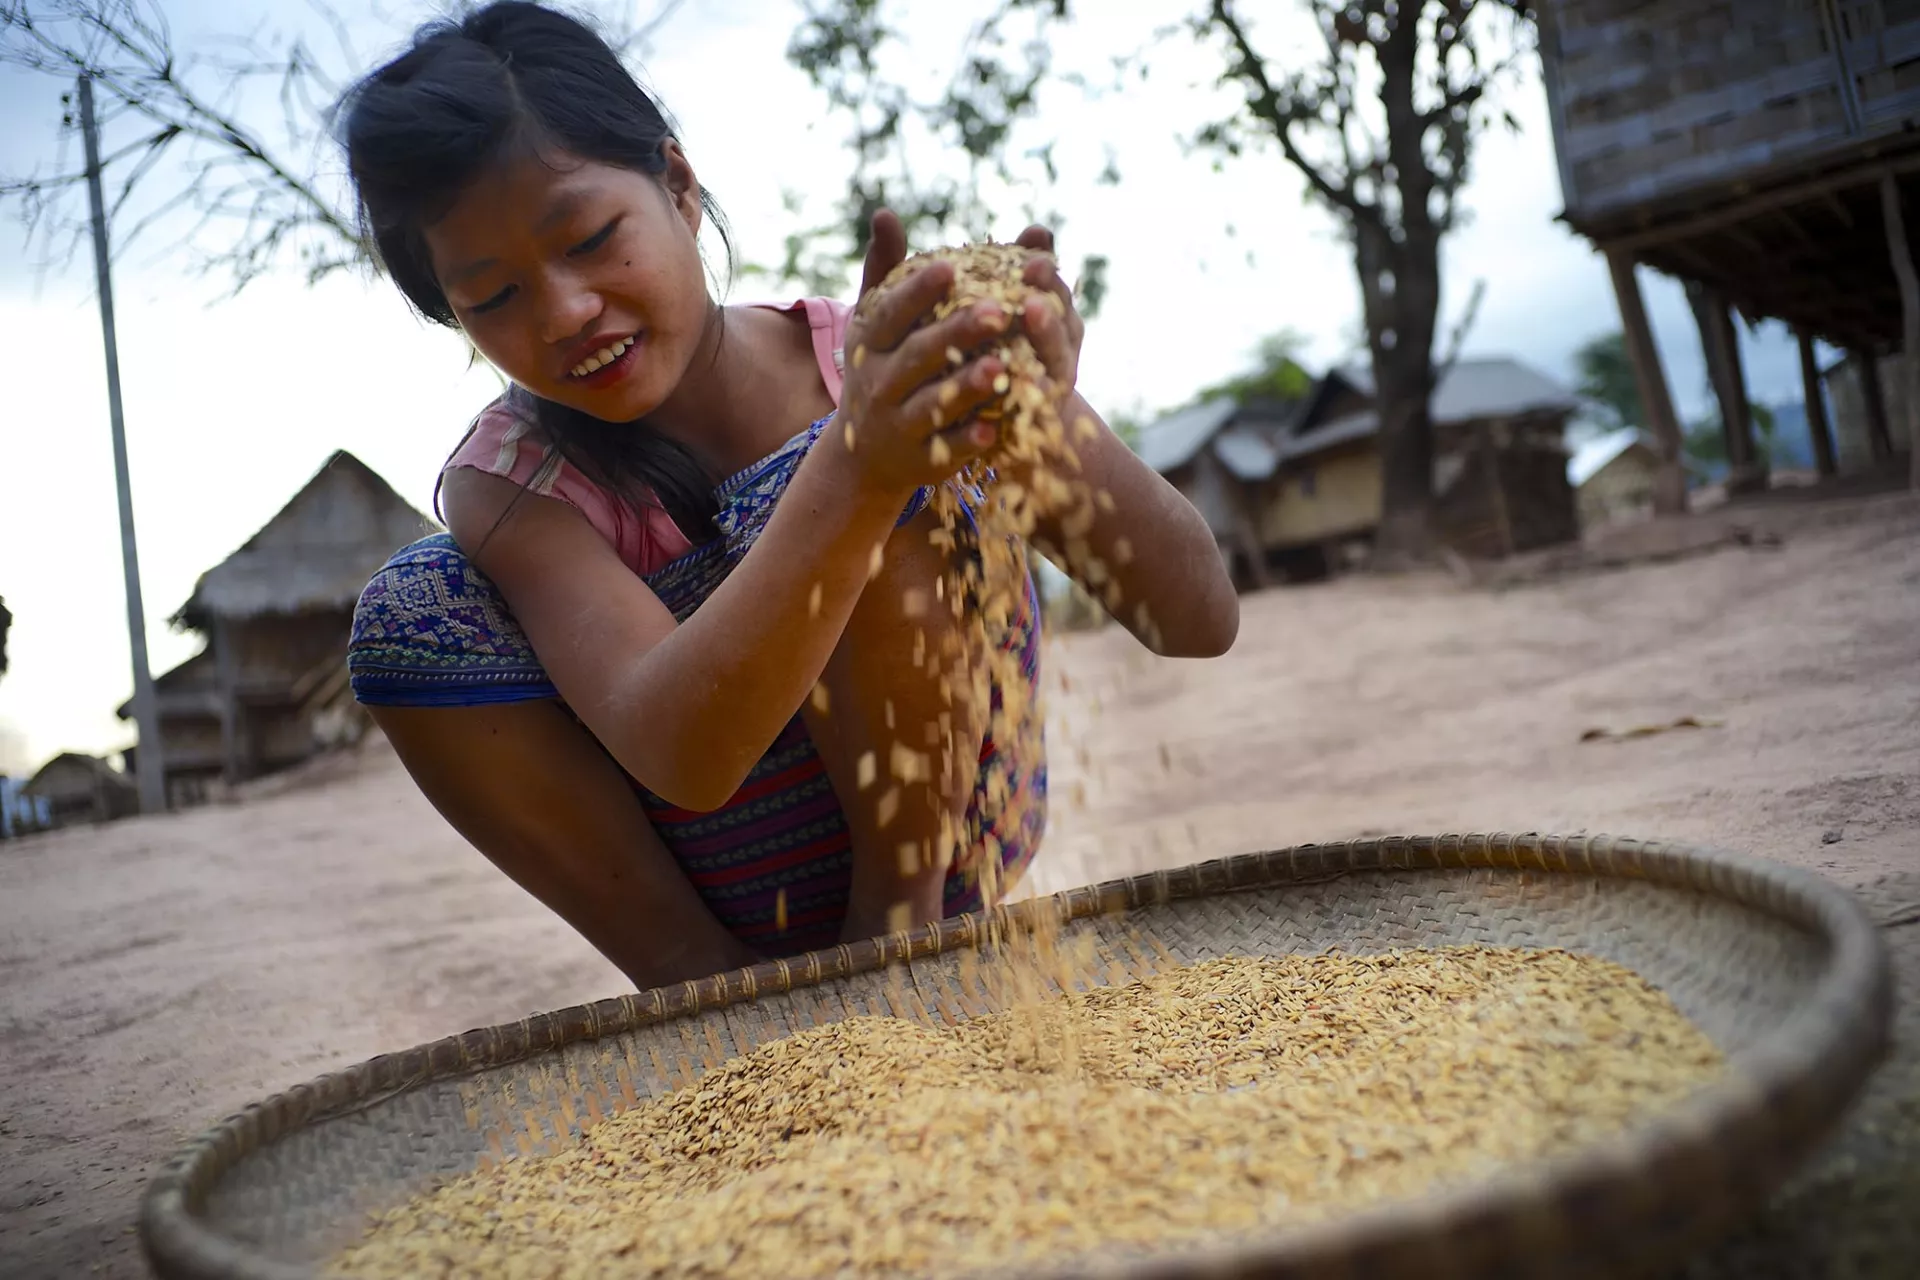 An adolescent girl winnows rice to remove the chaff, outside her family’s home, Laos